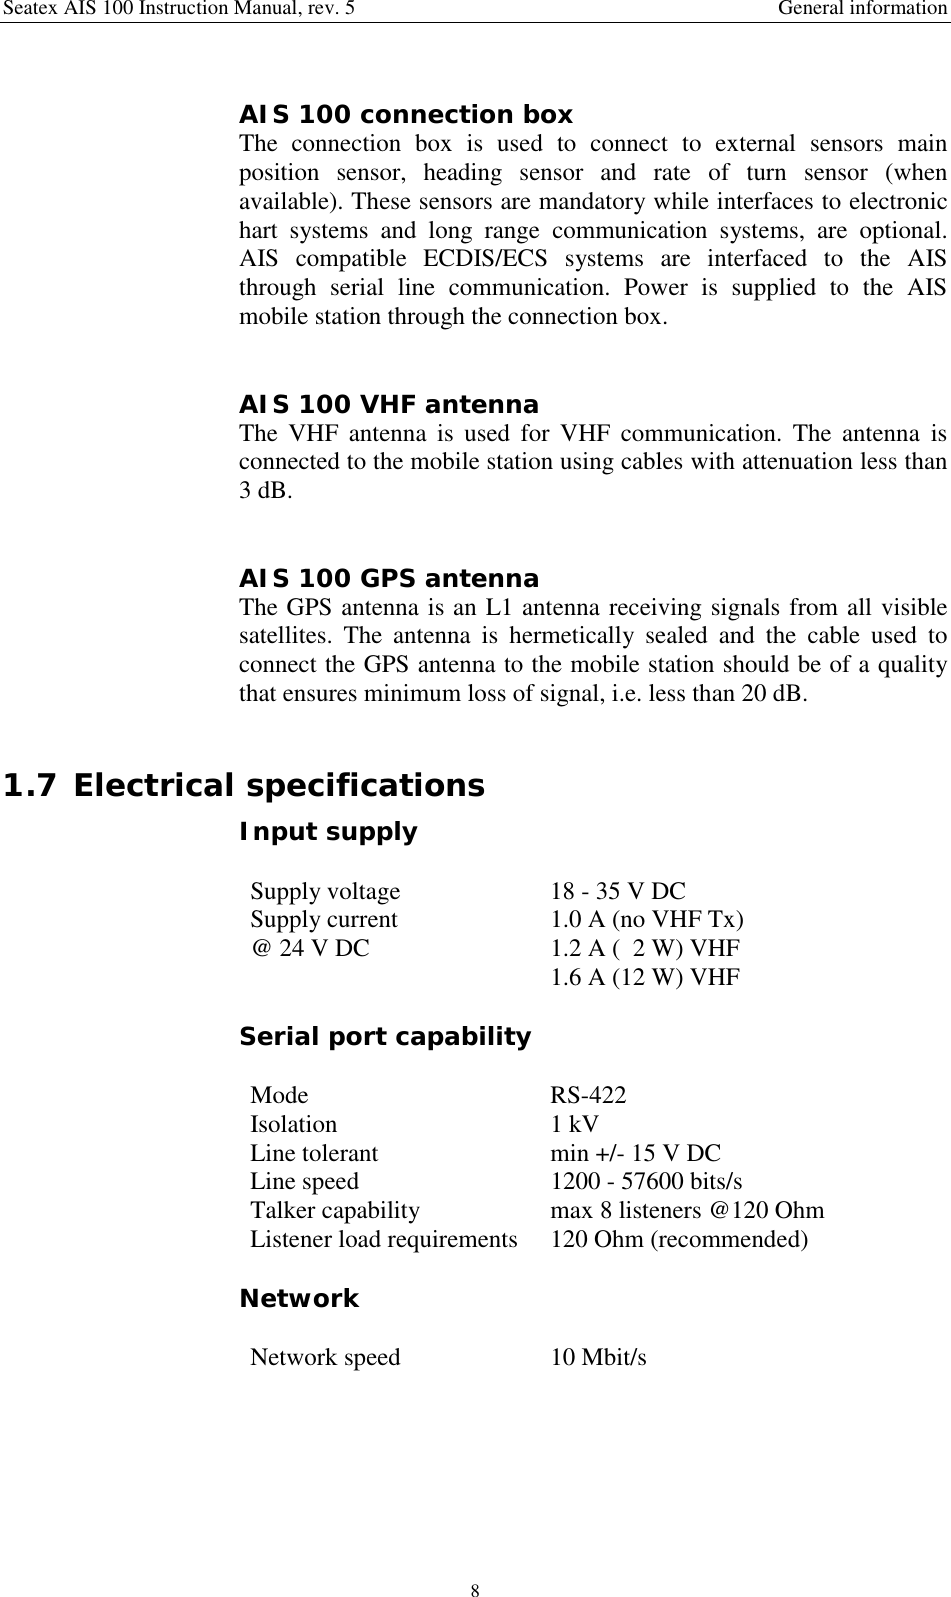 Seatex AIS 100 Instruction Manual, rev. 5 General information8AIS 100 connection boxThe connection box is used to connect to external sensors mainposition sensor, heading sensor and rate of turn sensor (whenavailable). These sensors are mandatory while interfaces to electronichart systems and long range communication systems, are optional.AIS compatible ECDIS/ECS systems are interfaced to the AISthrough serial line communication. Power is supplied to the AISmobile station through the connection box.AIS 100 VHF antennaThe VHF antenna is used for VHF communication. The antenna isconnected to the mobile station using cables with attenuation less than3 dB.AIS 100 GPS antennaThe GPS antenna is an L1 antenna receiving signals from all visiblesatellites. The antenna is hermetically sealed and the cable used toconnect the GPS antenna to the mobile station should be of a qualitythat ensures minimum loss of signal, i.e. less than 20 dB.1.7 Electrical specificationsInput supplySupply voltage 18 - 35 V DCSupply current@ 24 V DC 1.0 A (no VHF Tx)1.2 A (  2 W) VHF1.6 A (12 W) VHFSerial port capabilityMode RS-422Isolation 1 kVLine tolerant min +/- 15 V DCLine speed 1200 - 57600 bits/sTalker capability max 8 listeners @120 OhmListener load requirements 120 Ohm (recommended)NetworkNetwork speed 10 Mbit/s